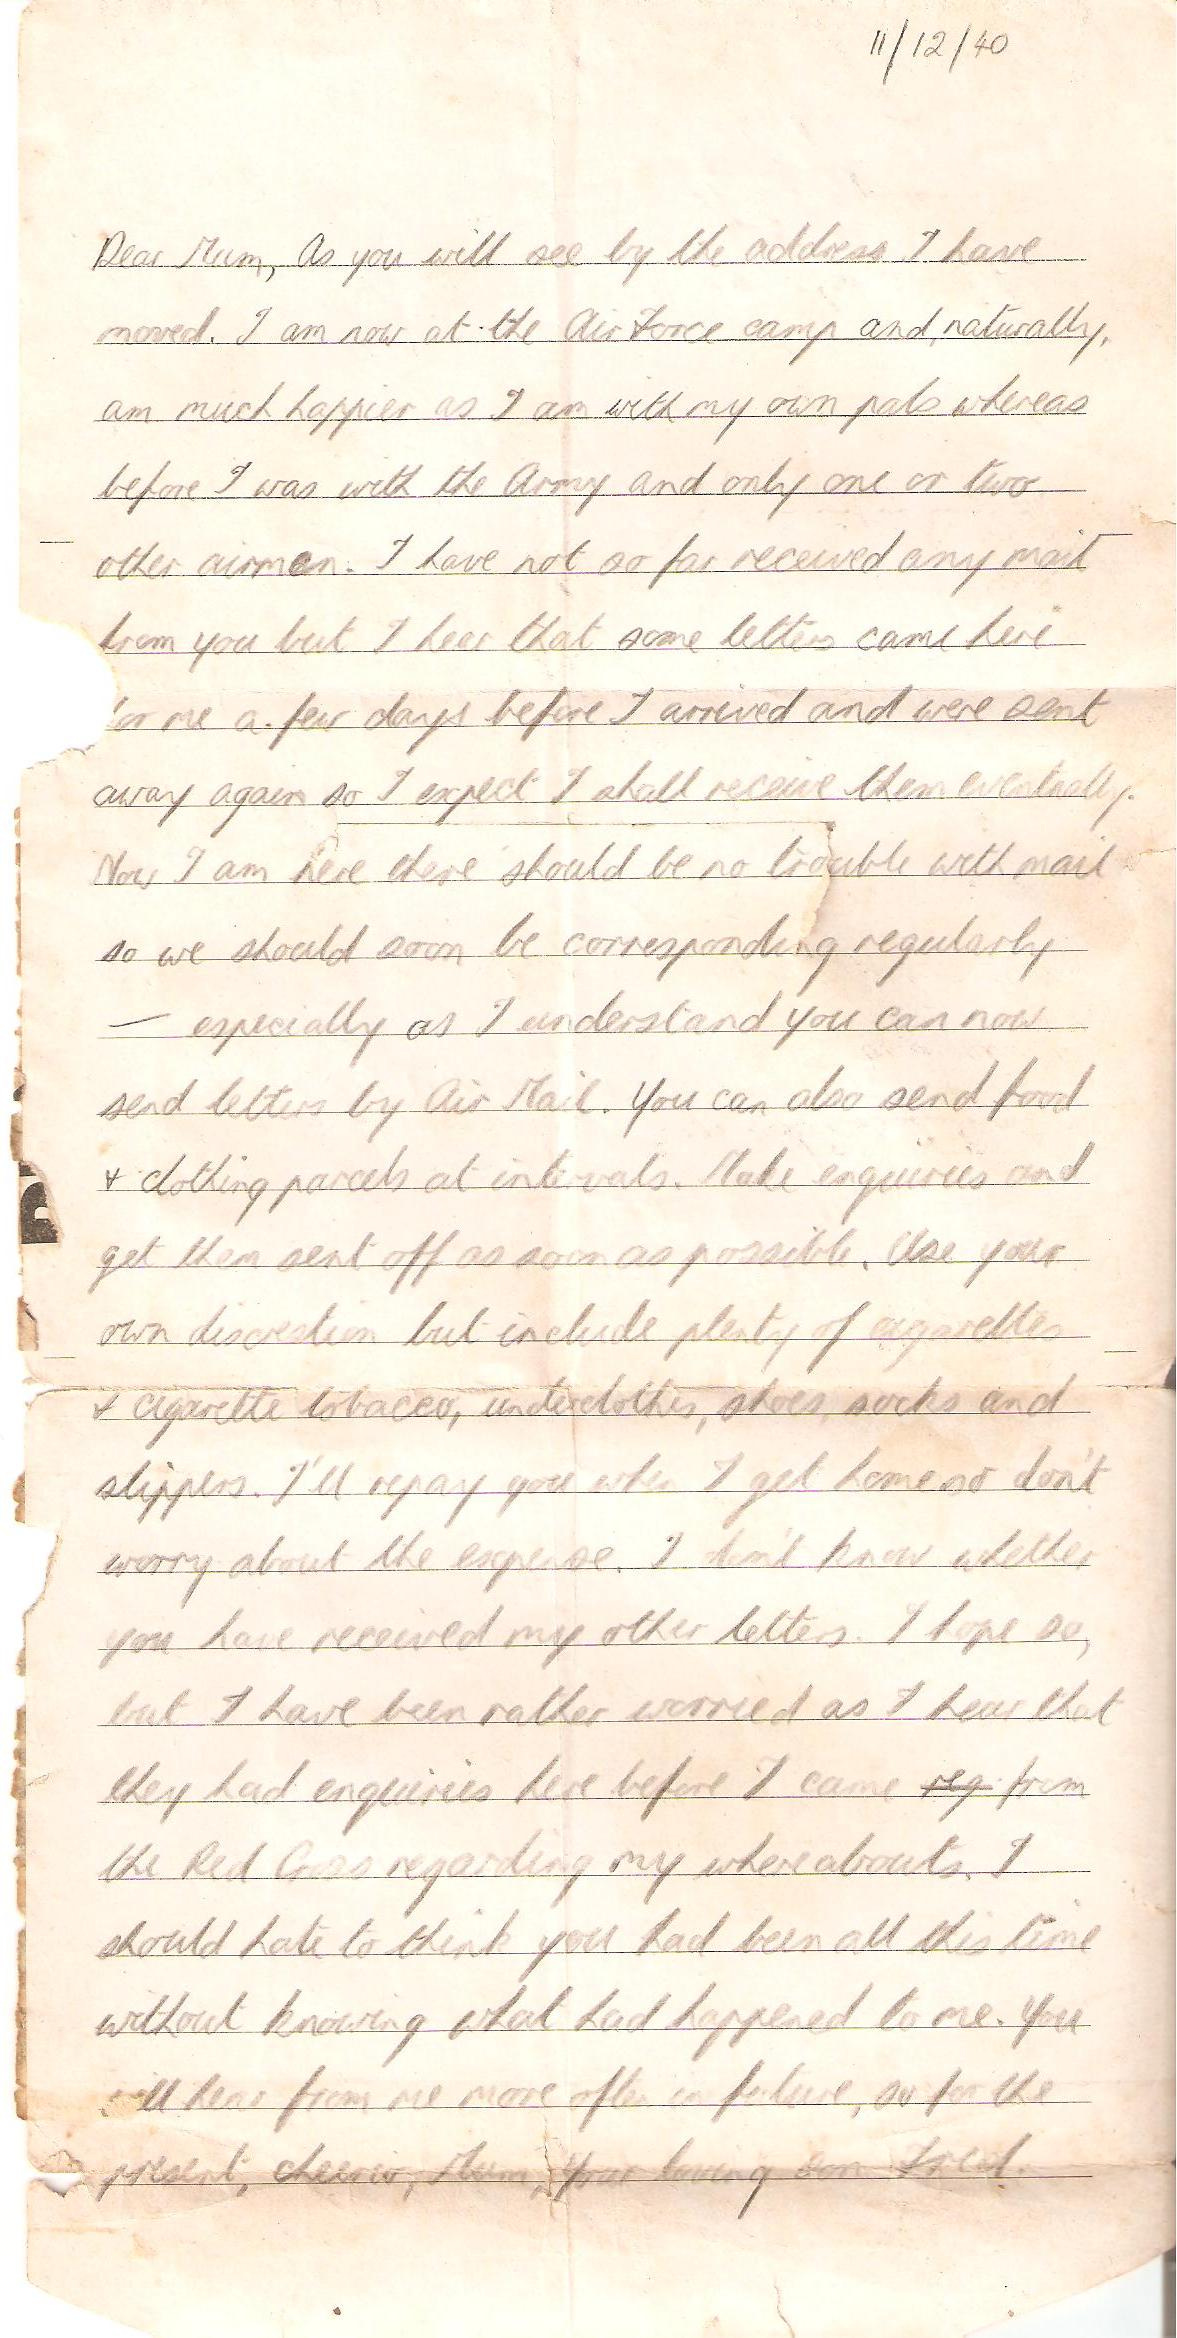 A scan of Fred's letter written in pencil that is transcribed in text below it.